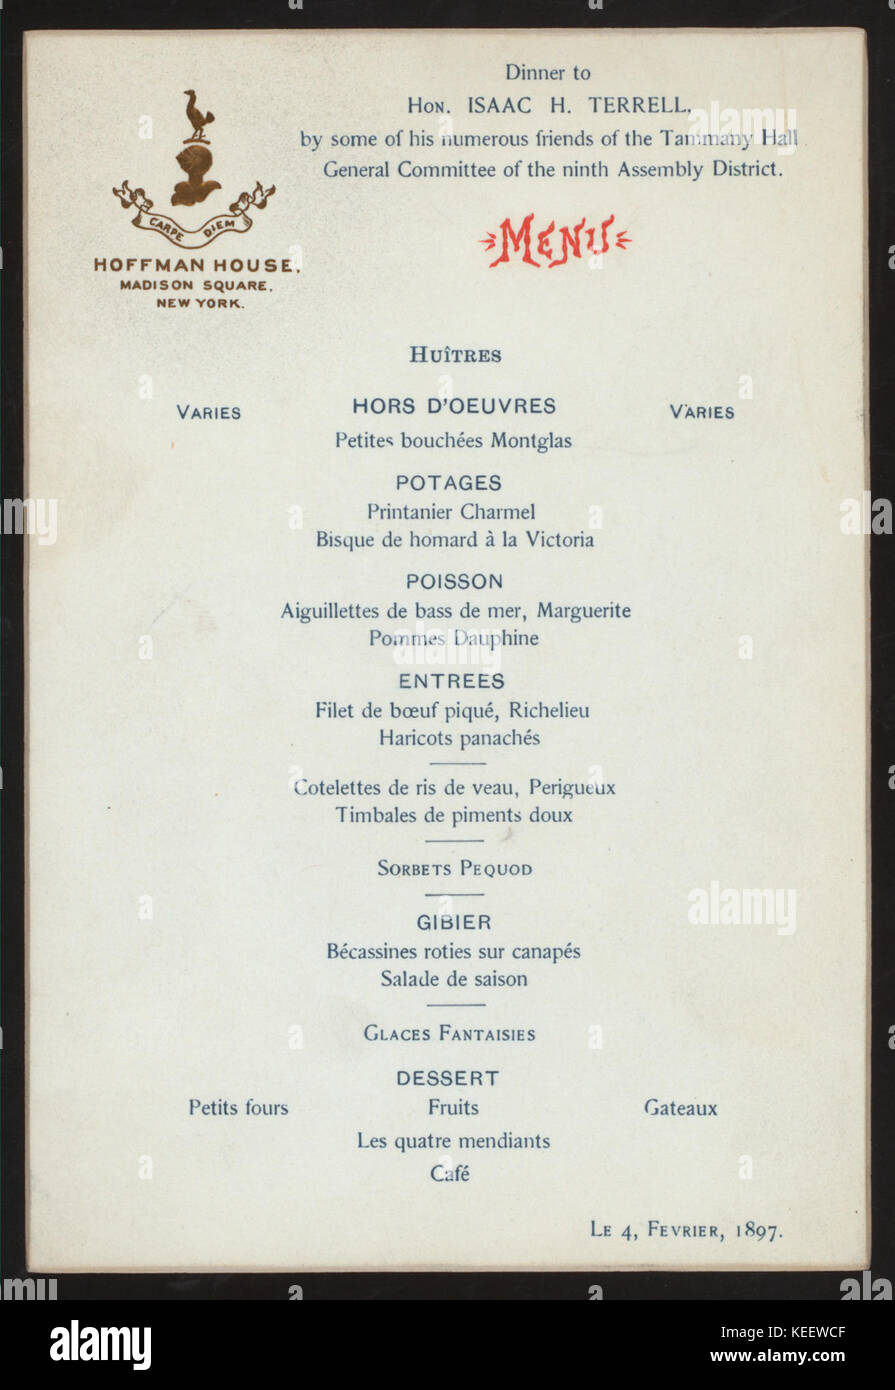 DINNER TO HON.ISAAC H. TERRELL (held by) TAMMANY HALL GENERAL COMMITTEE OF THE NINTH ASSEMBLY DISTRICT (at)  HOFFMAN HOUSE,NEW YORK, NY  (HOTEL;) (NYPL Hades 270865 470573) Stock Photo